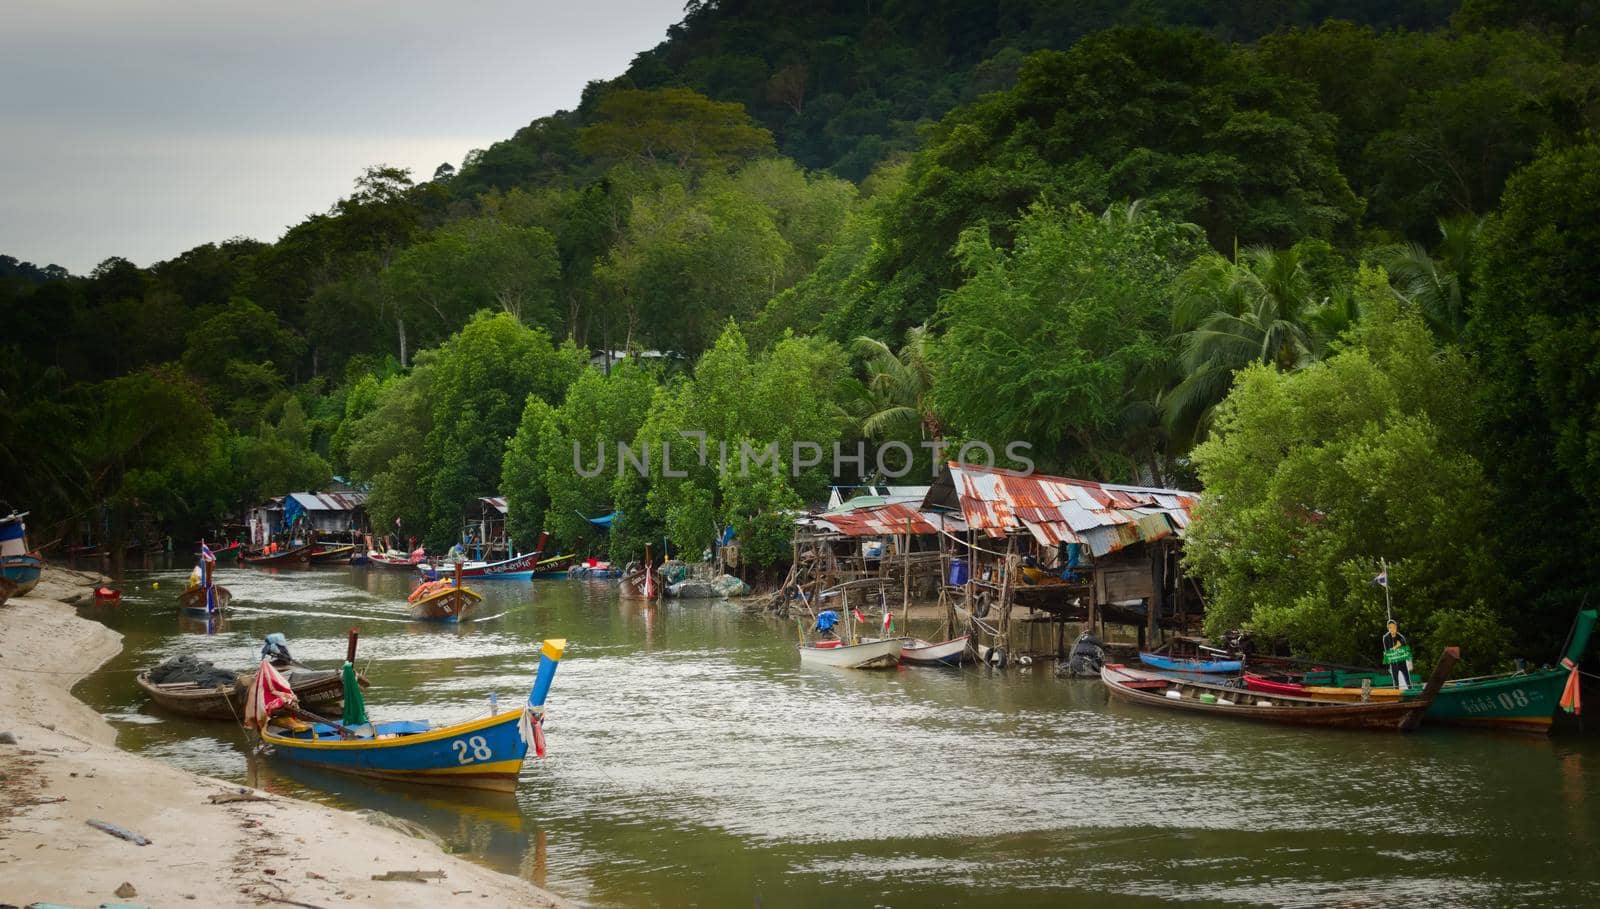 2019-11-05 / Phuket, Thailand - Wooden shacks by the river in a poverty stricken area of the town. by hernan_hyper